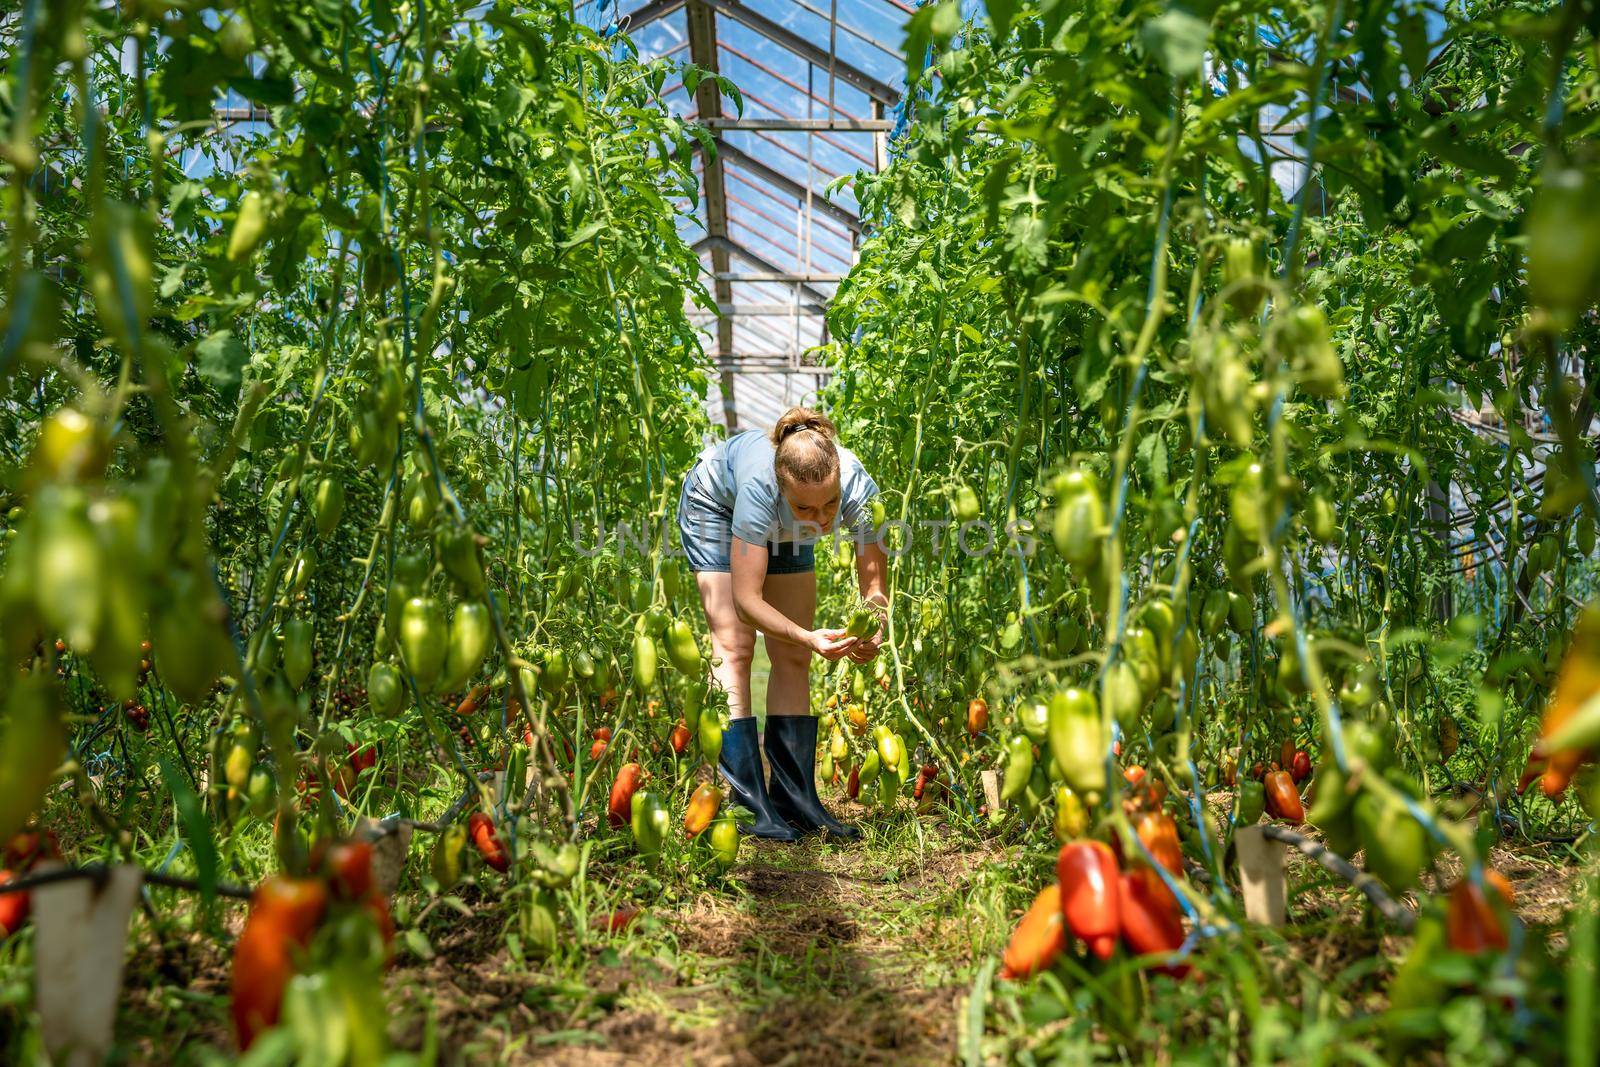 red peppers grown in a greenhouse on an organic farm by Edophoto